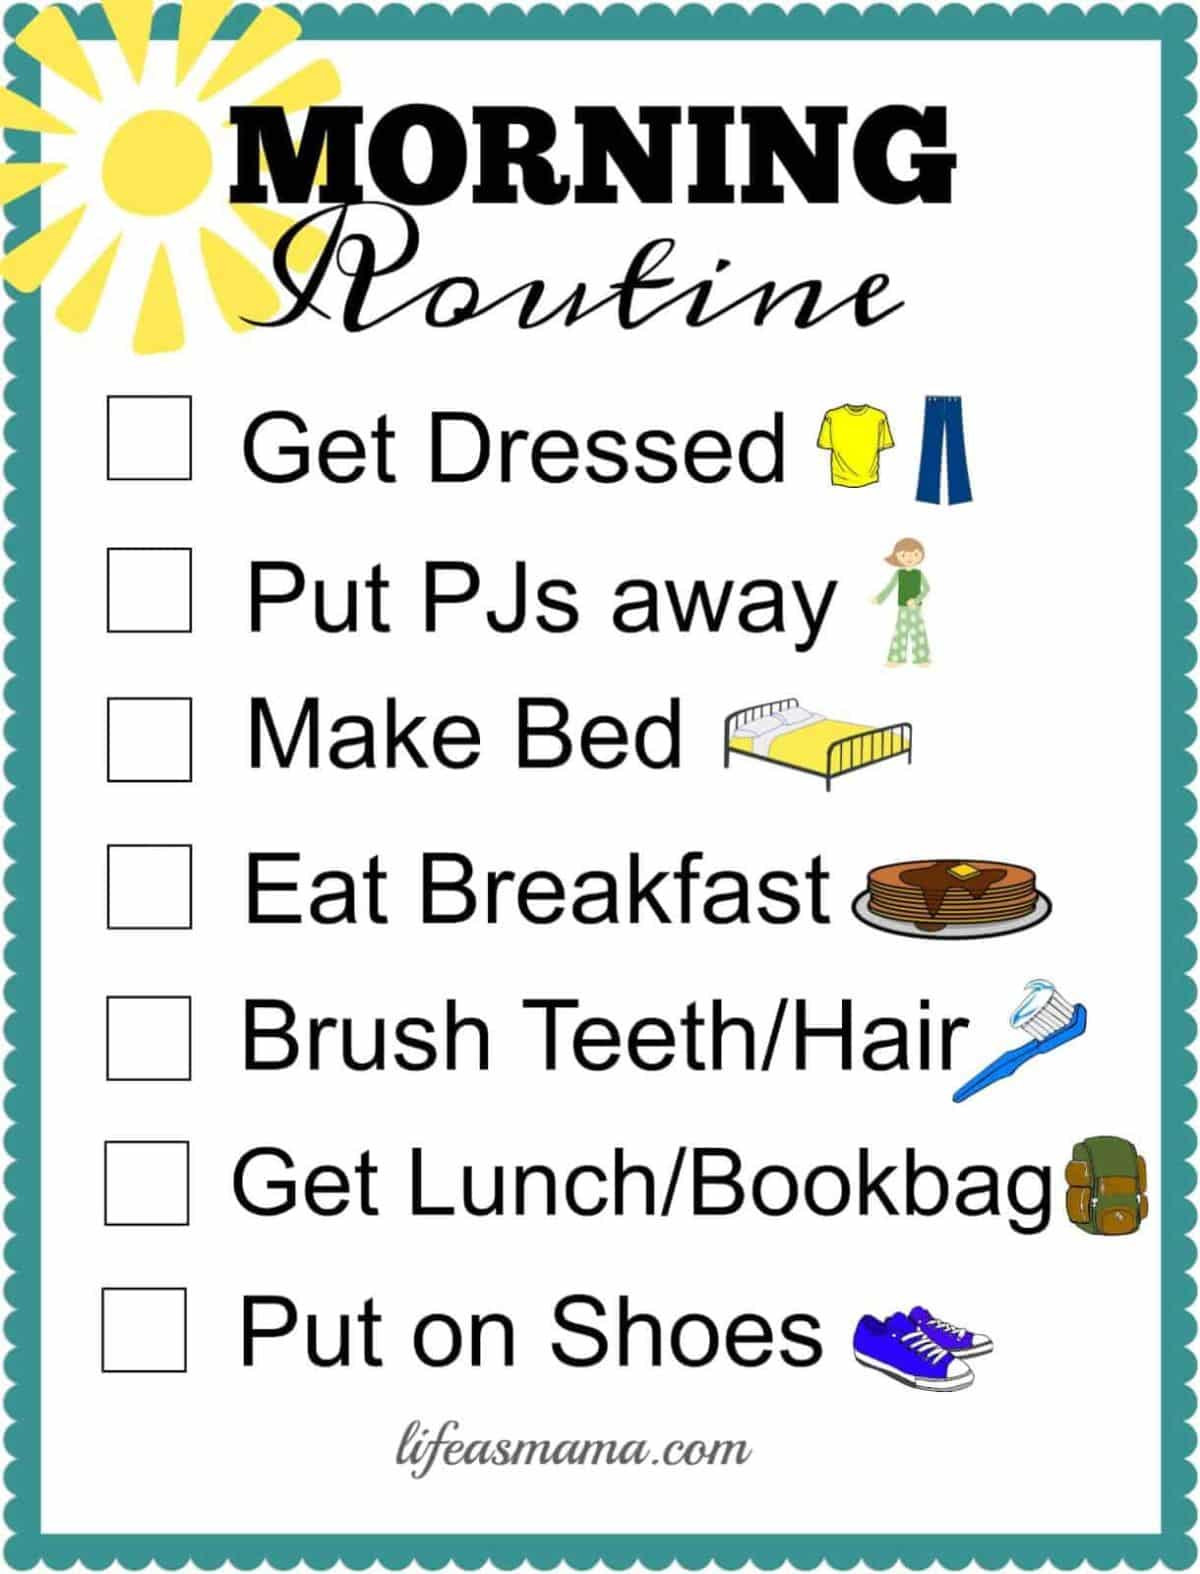 Morning routine check list.